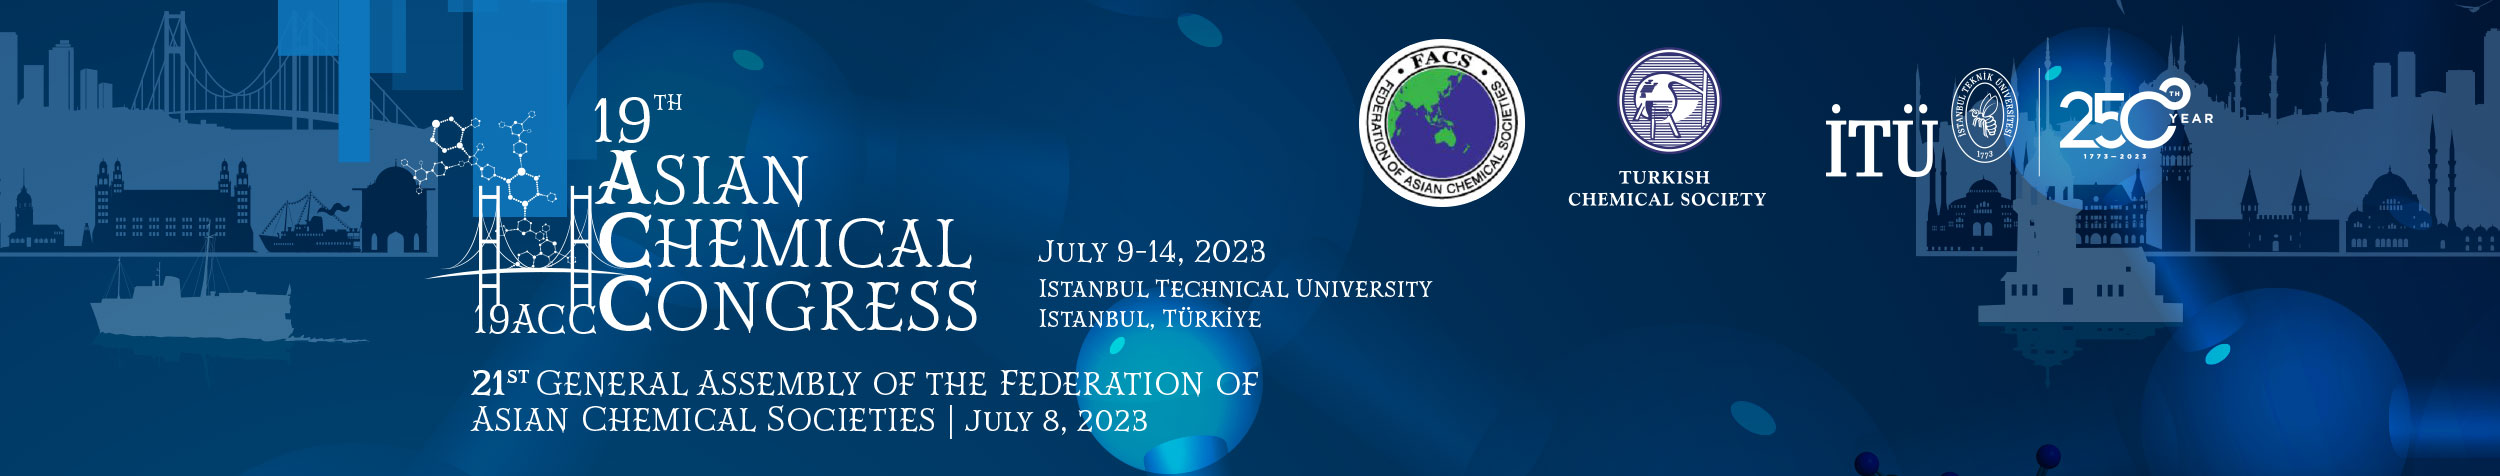 Asiachem – 19th Asian Chemical Congress